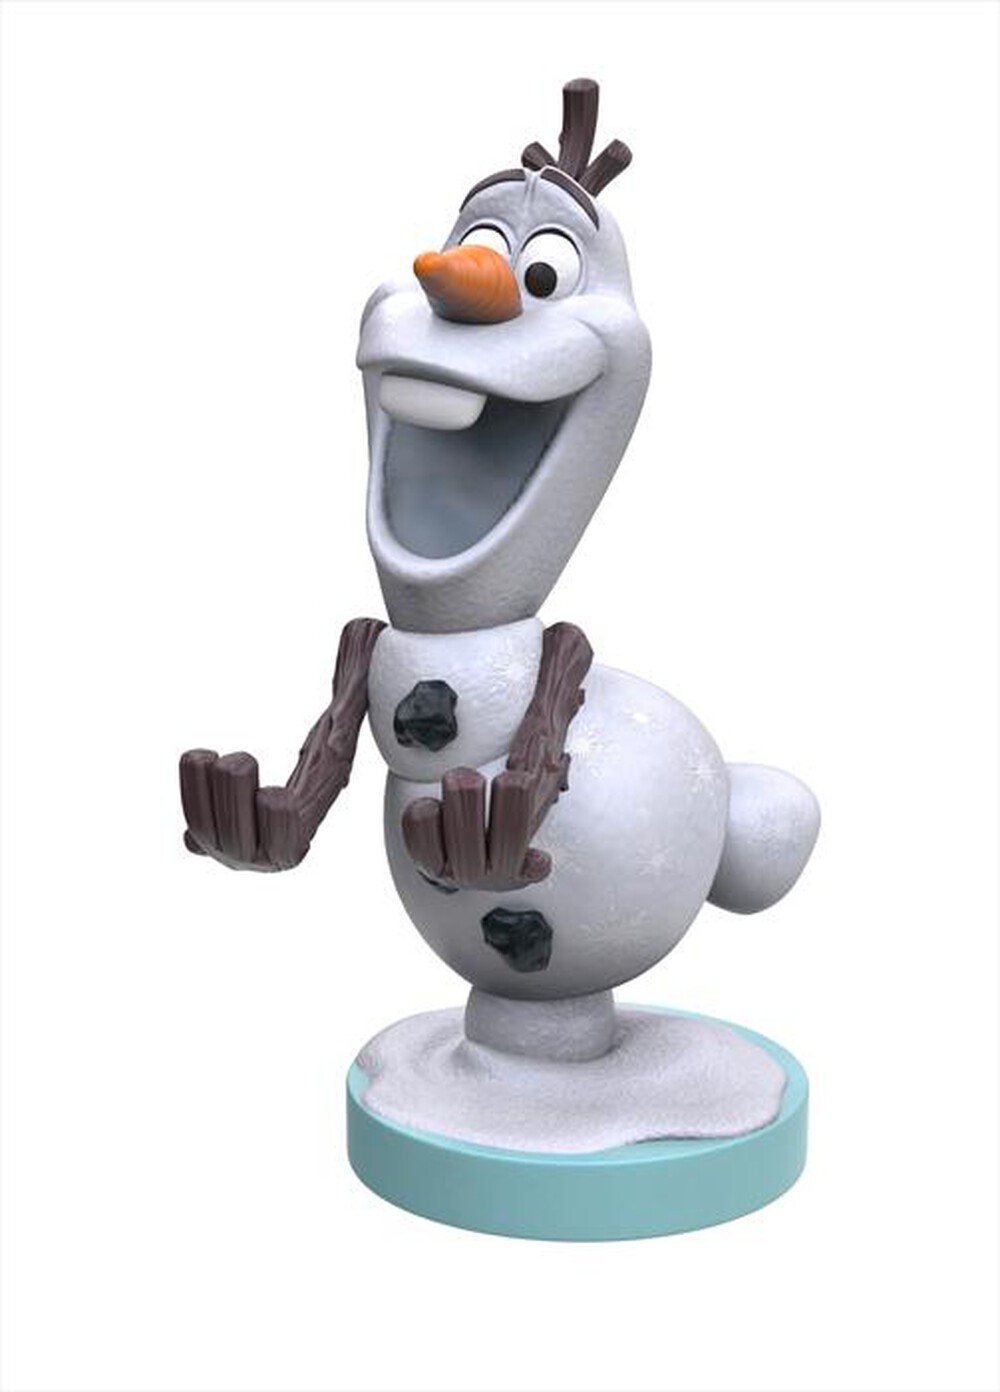 "EXQUISITE GAMING - OLAF CABLE GUY"